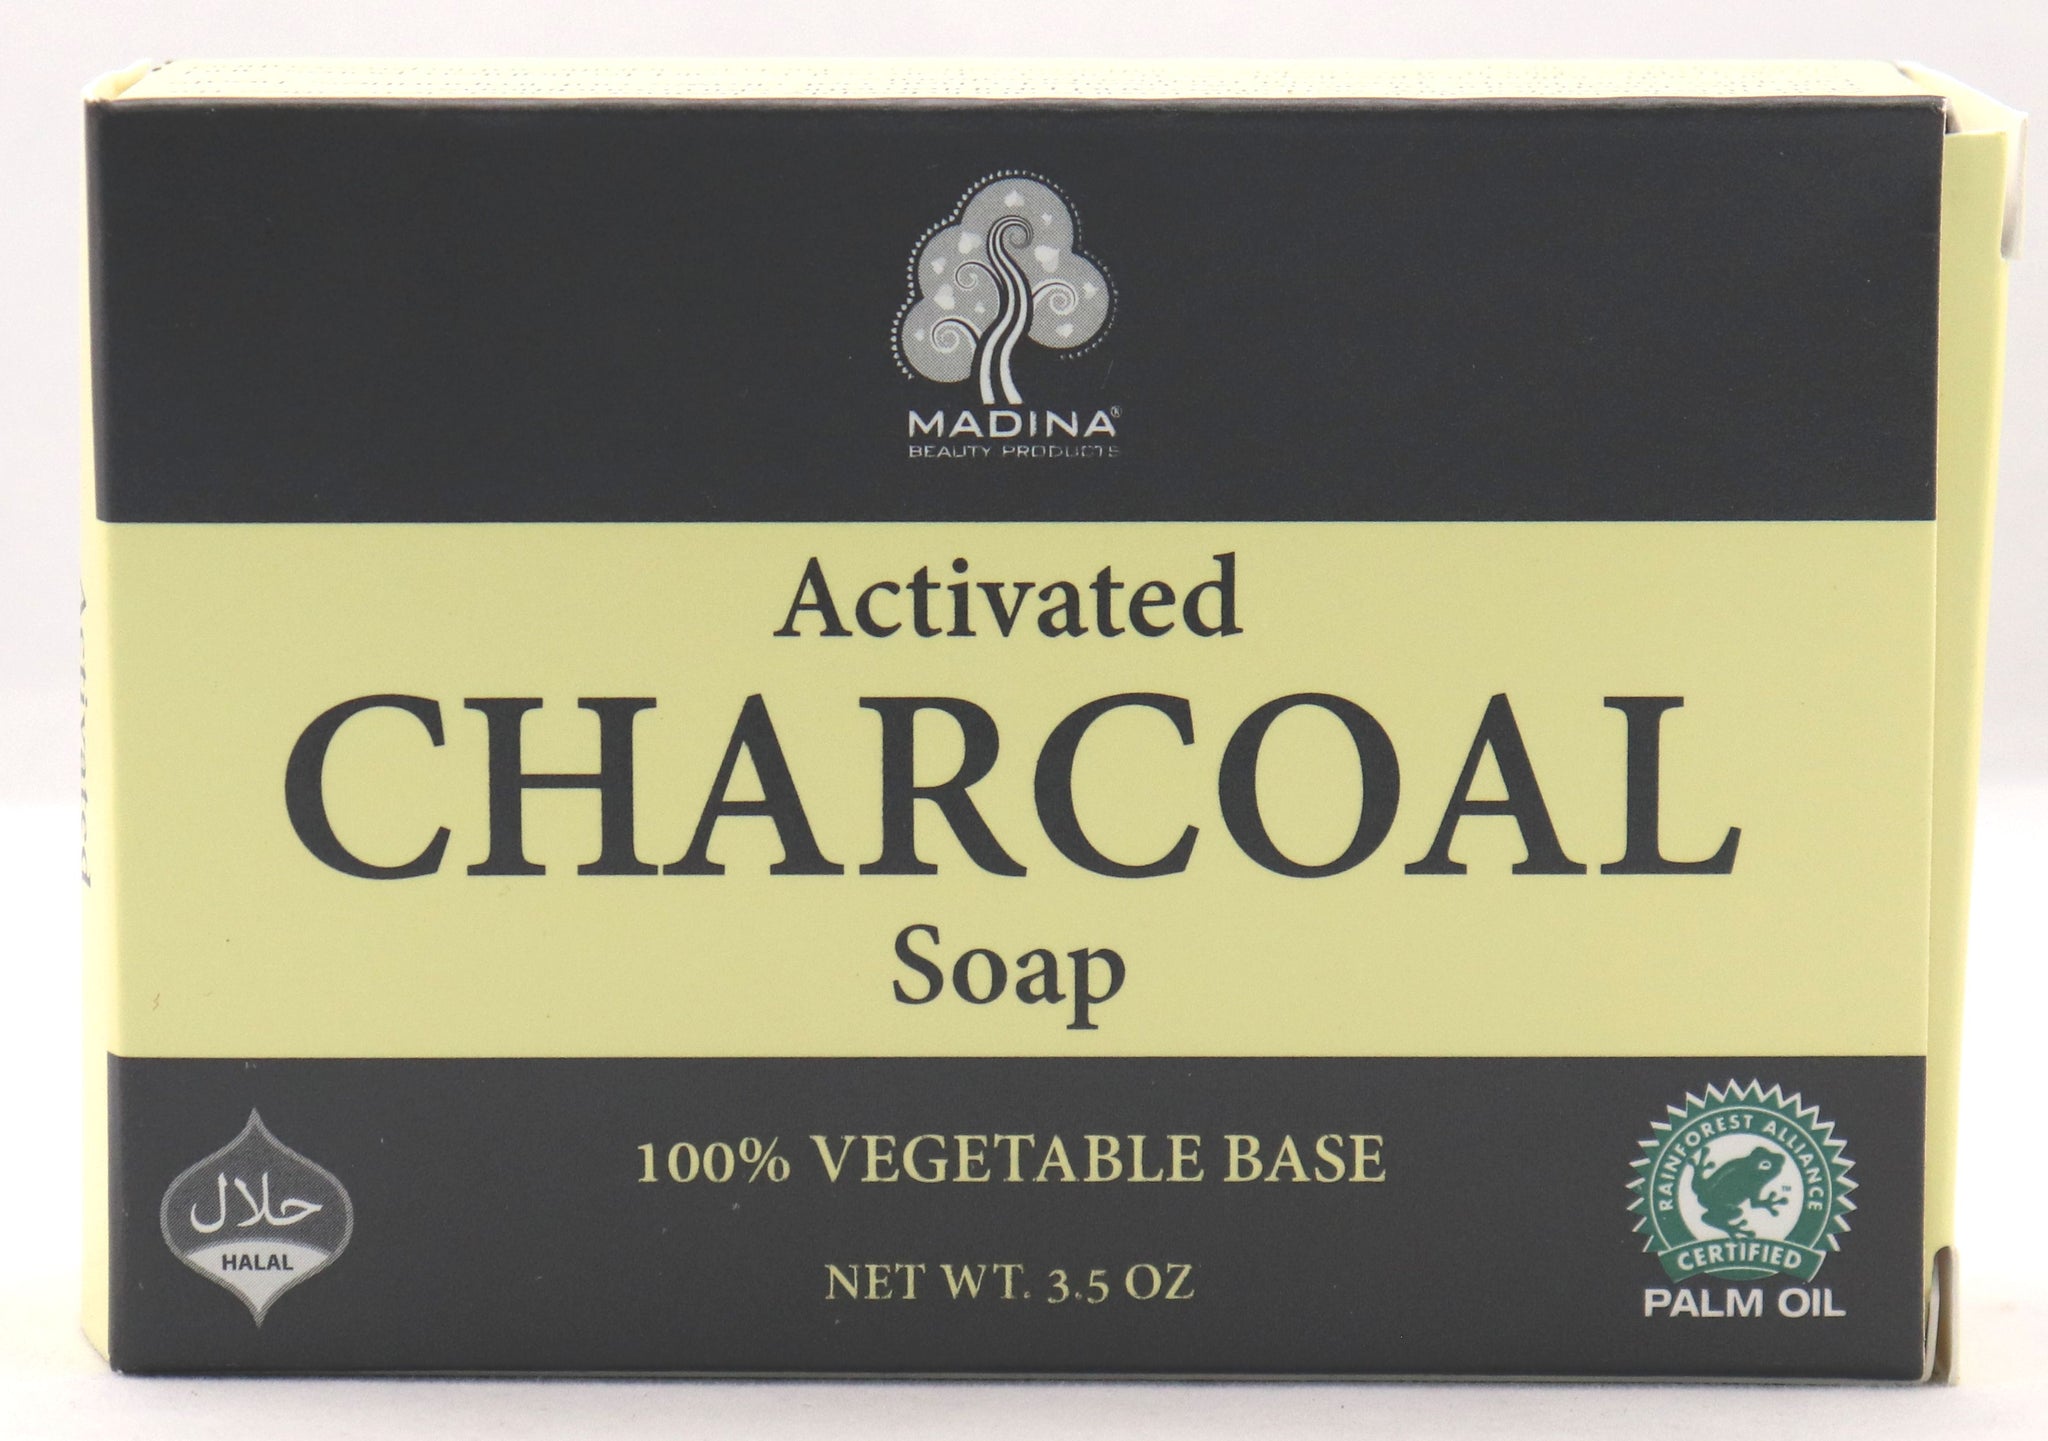 Category: Charcoal